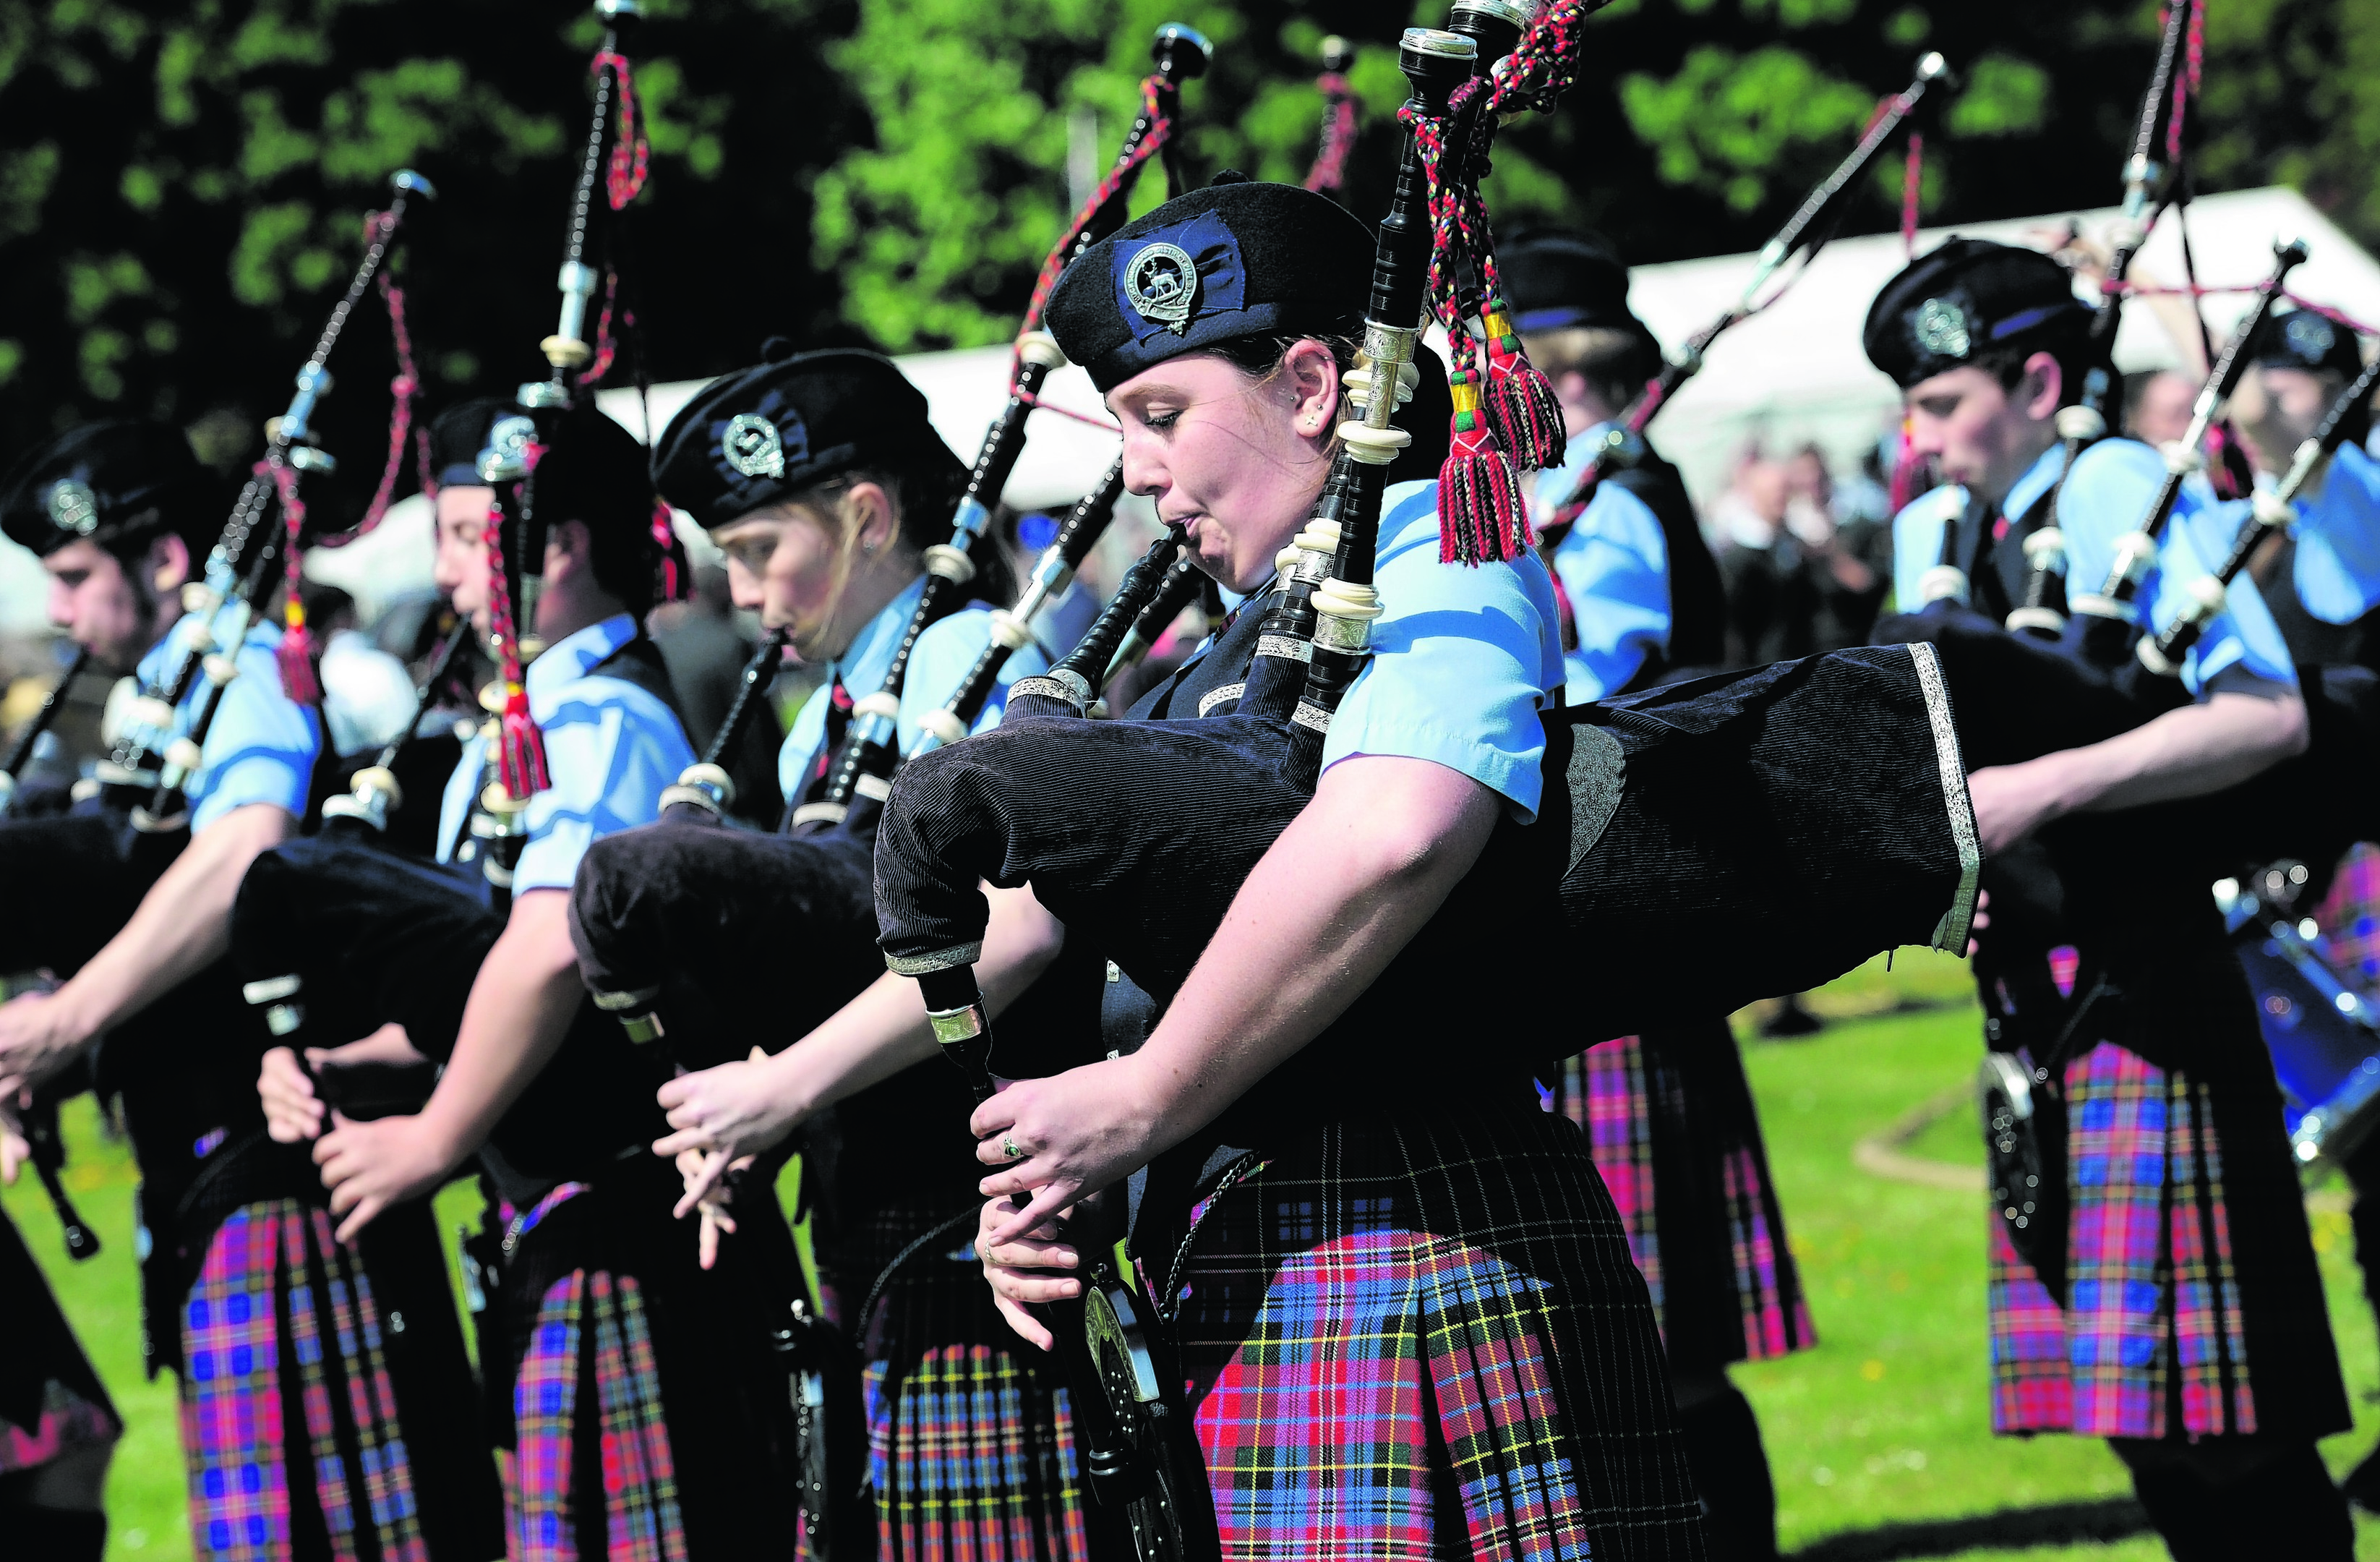 Don't miss your local Highland Games. Here's a list of events in our